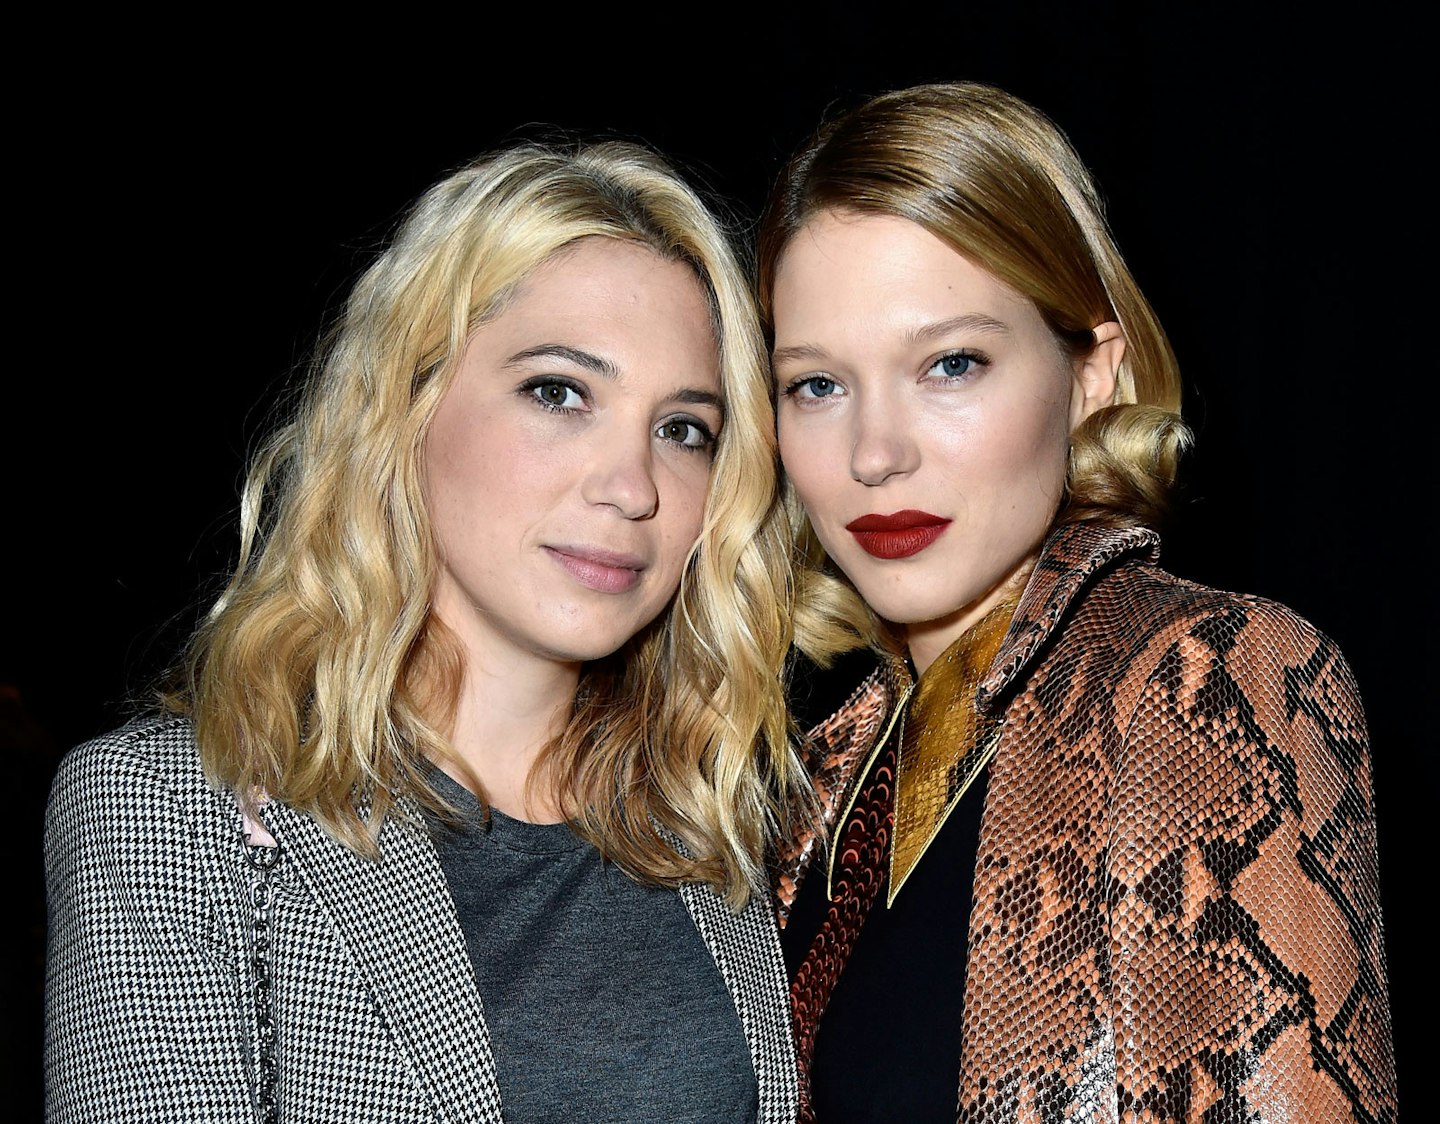 Camille Seydoux, Stylist and Sister of Léa, Gives the Bond Girl a Sexy,  Modern Update - Fashionista